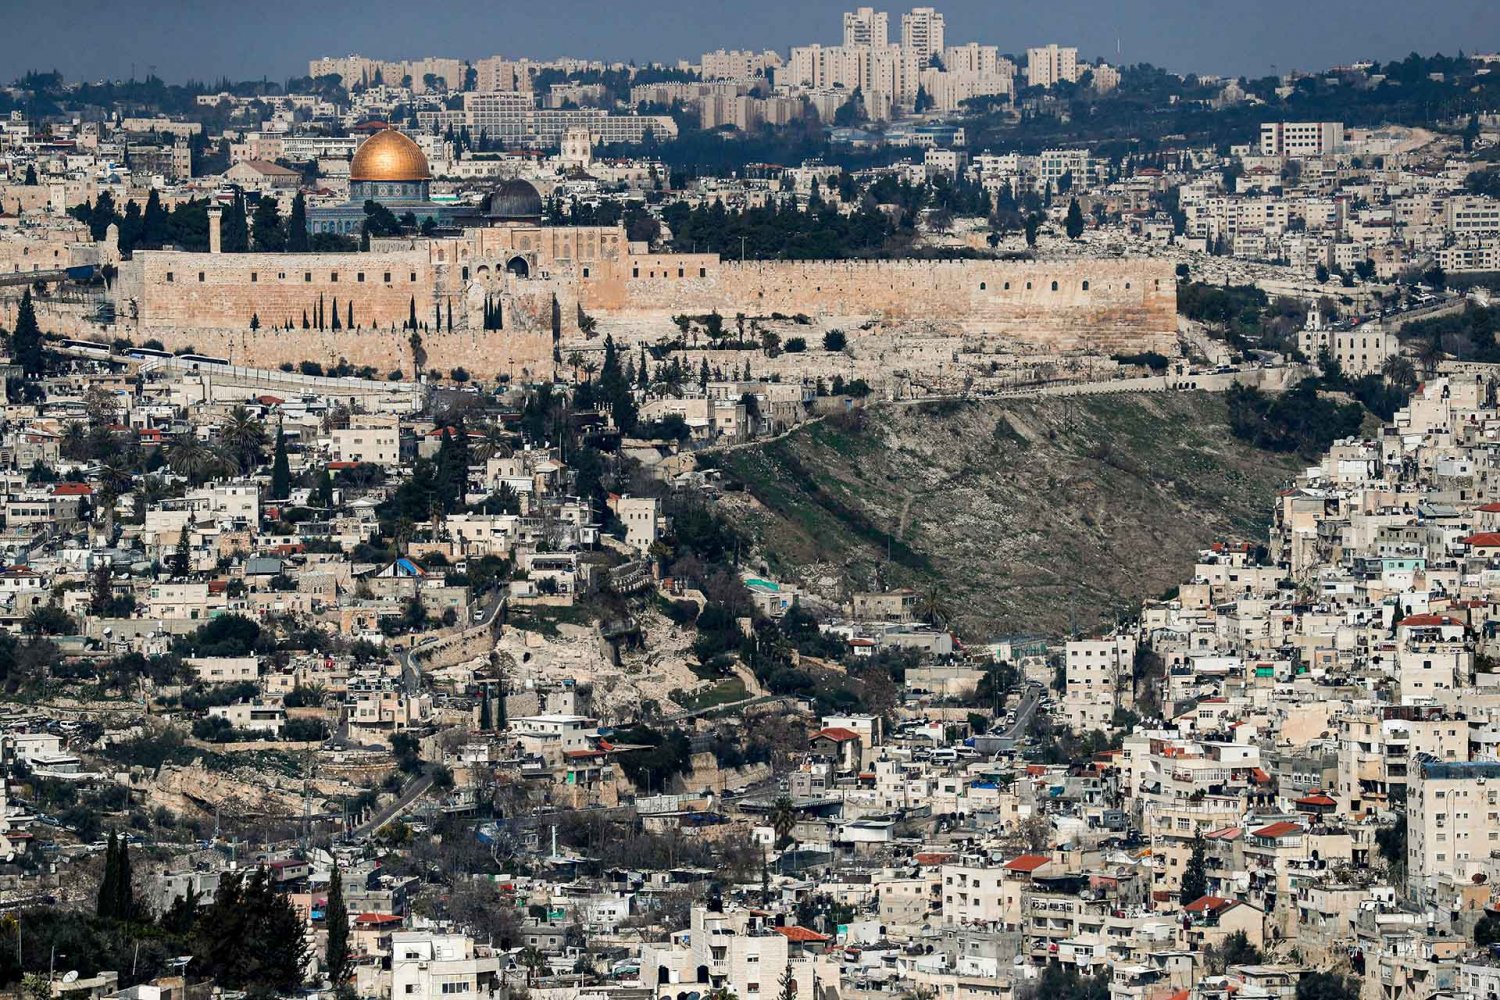 A view of the Old City of Jerusalem, including the Haram al-Sharif compound and Silwan, from Jabal Mukabbir, January 28, 2020